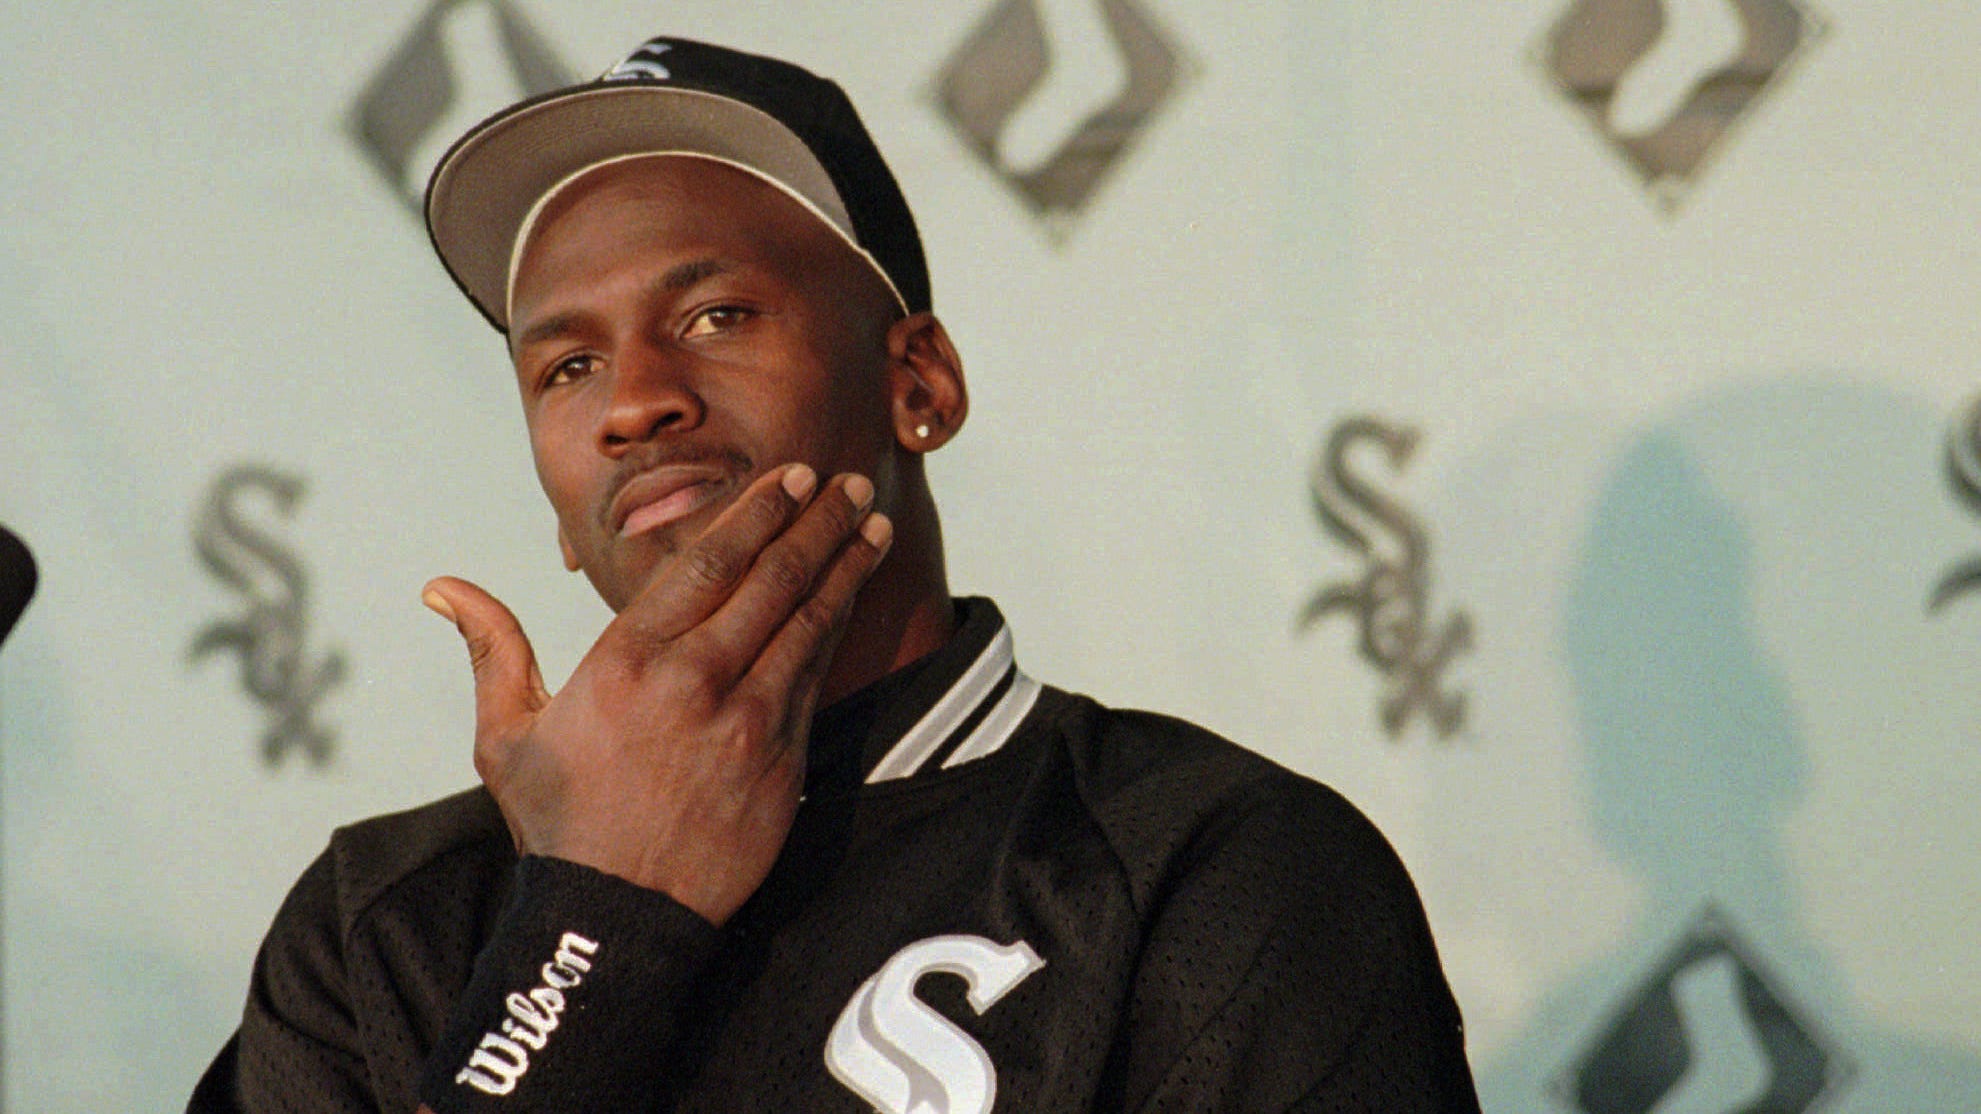 White Sox owner Jerry Reinsdorf says Michael Jordan would have reached the majors